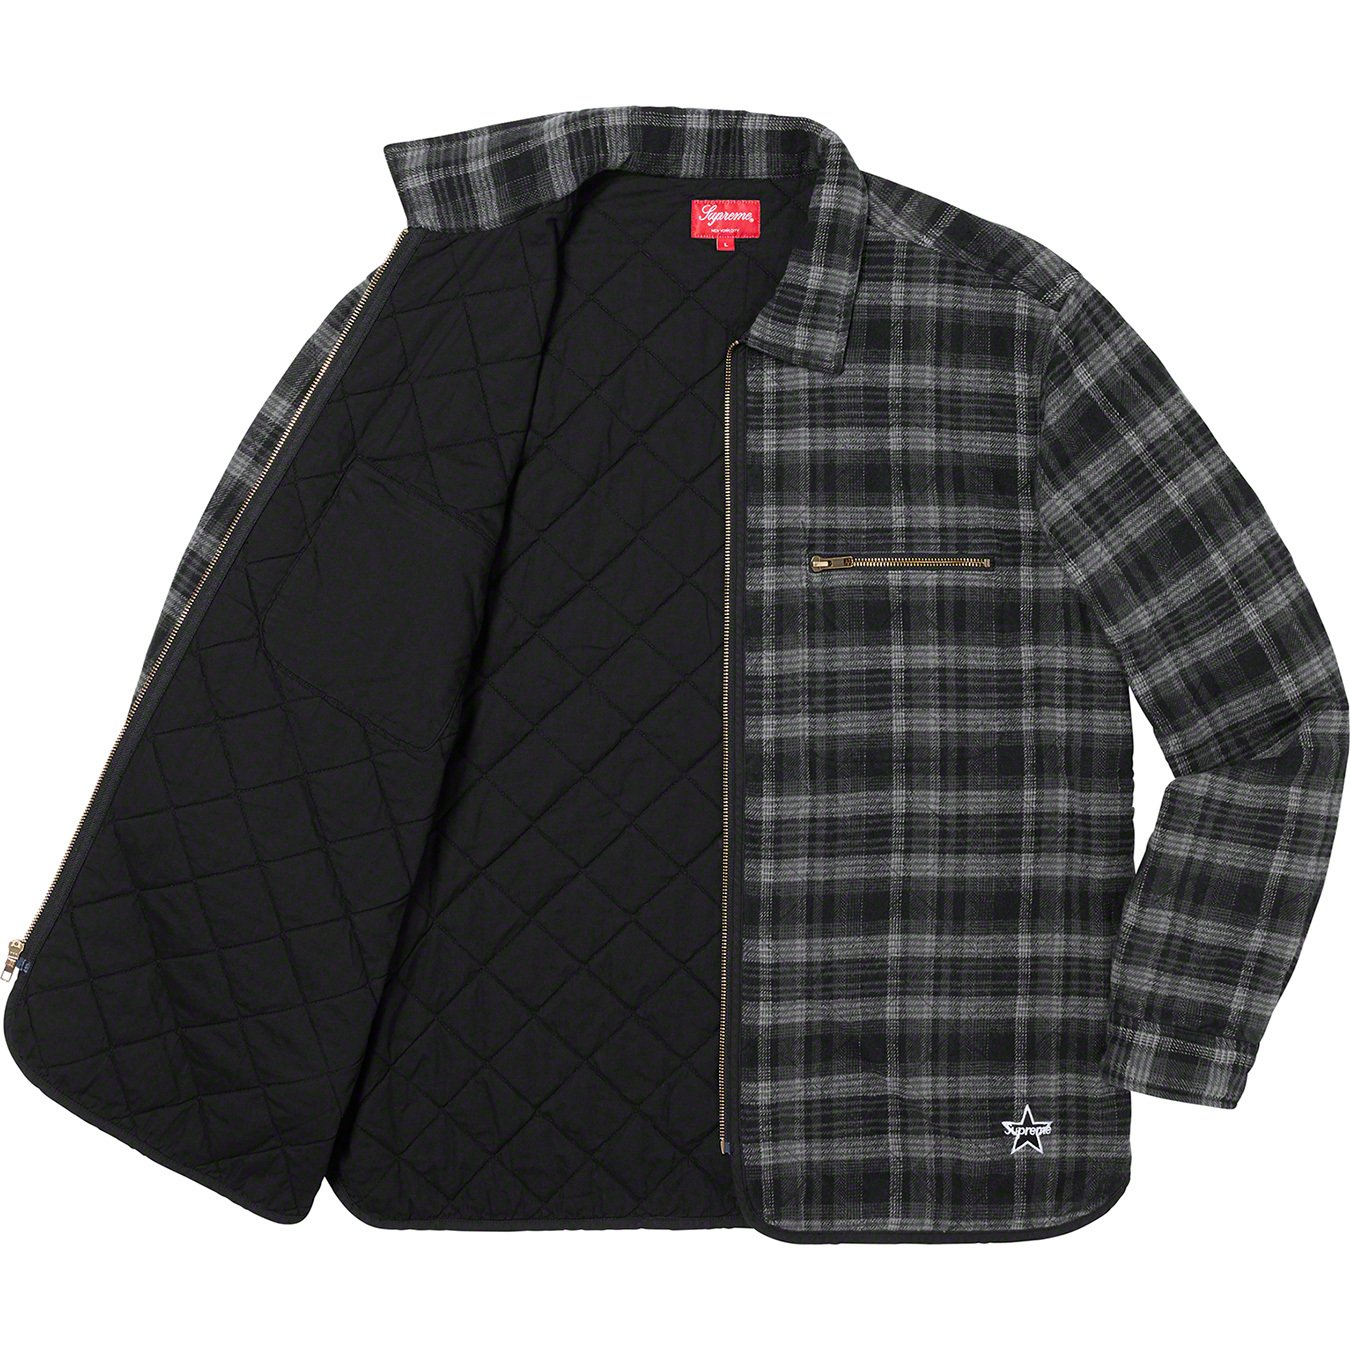 Quilted Plaid Zip Up Shirt - fall winter 2019 - Supreme